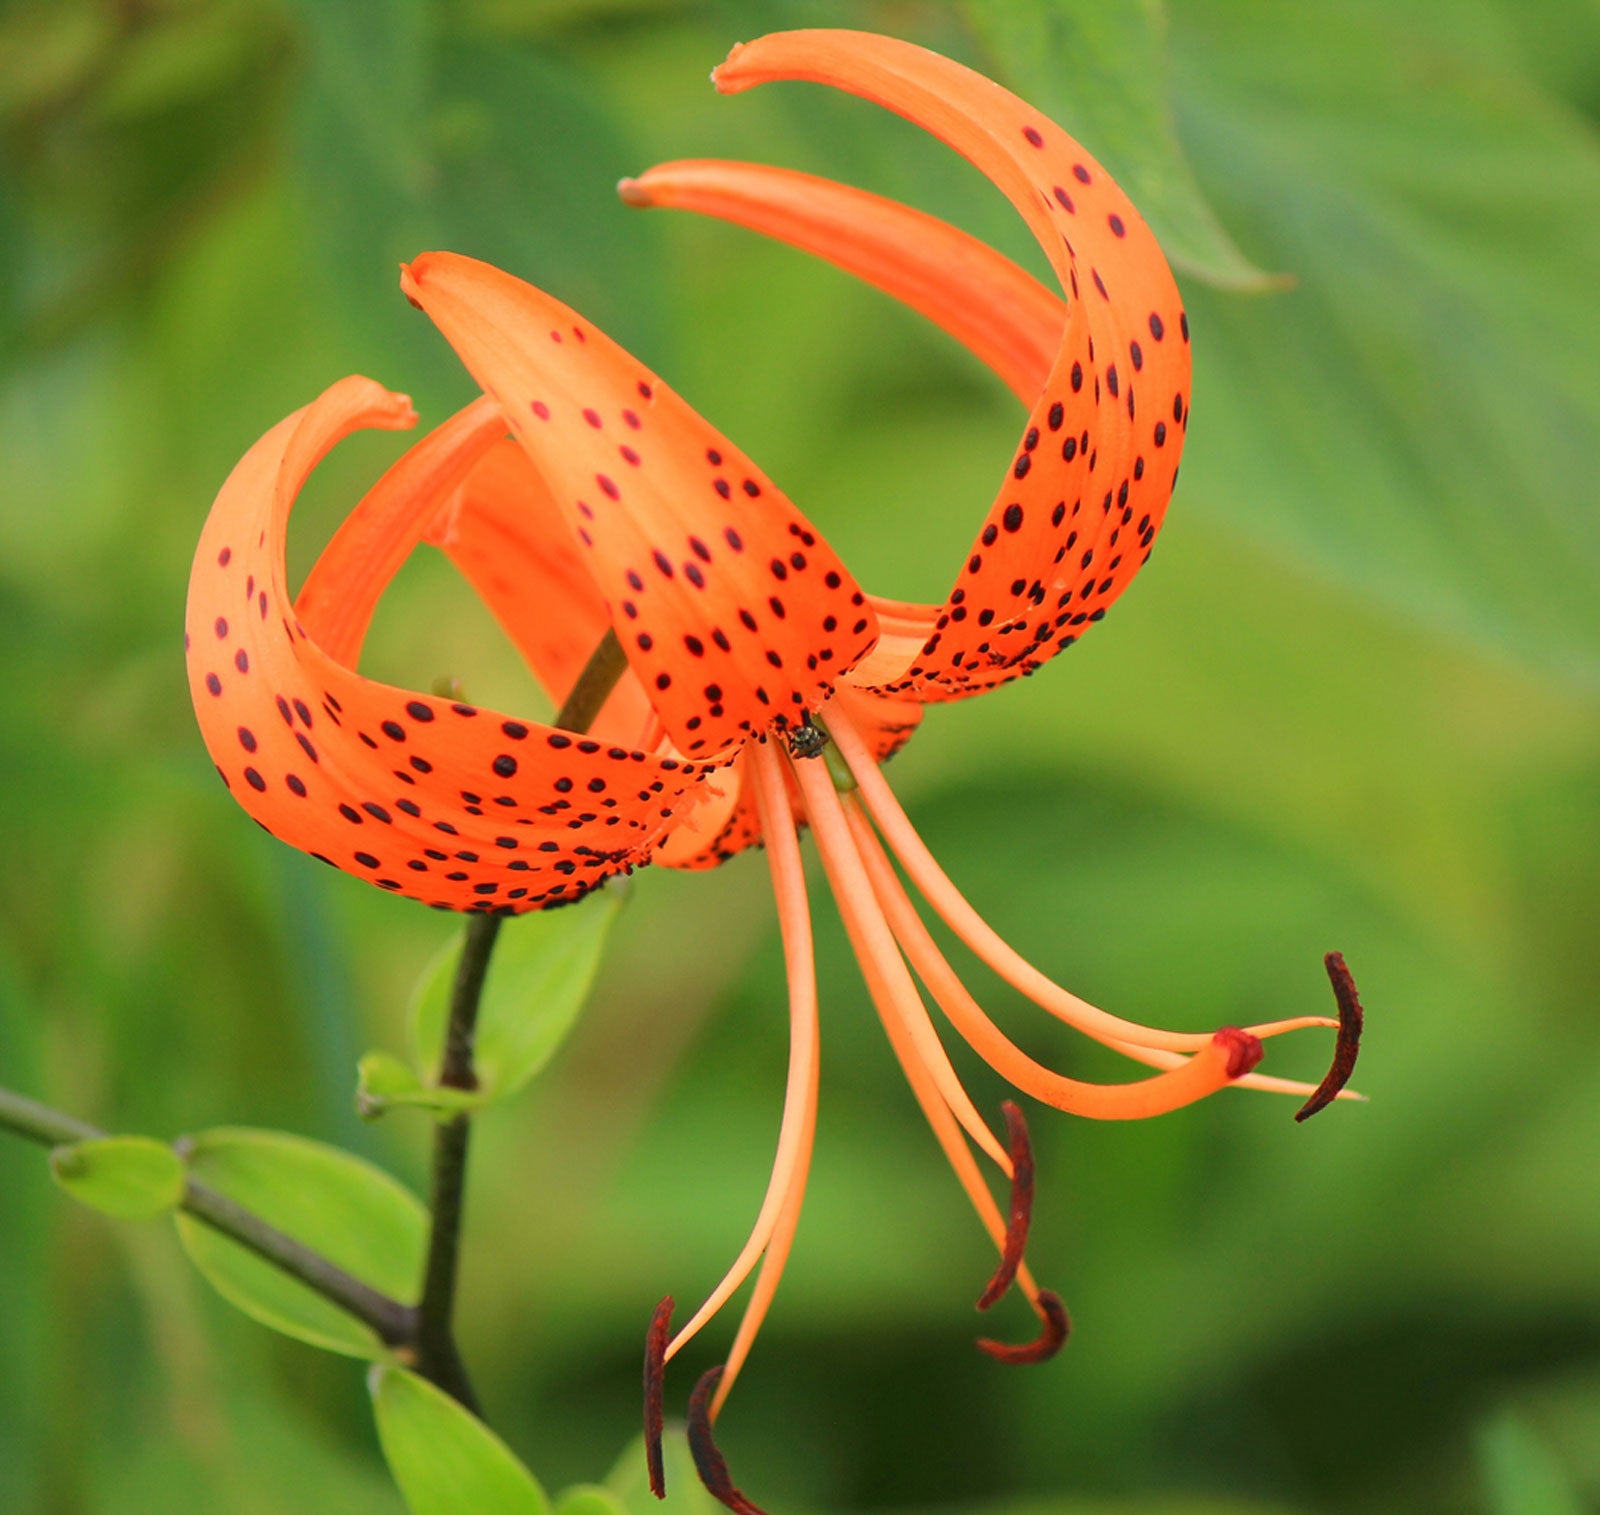 Tiger Lily Flowers   How To Grow Tiger Lilies And Tiger Lily Care